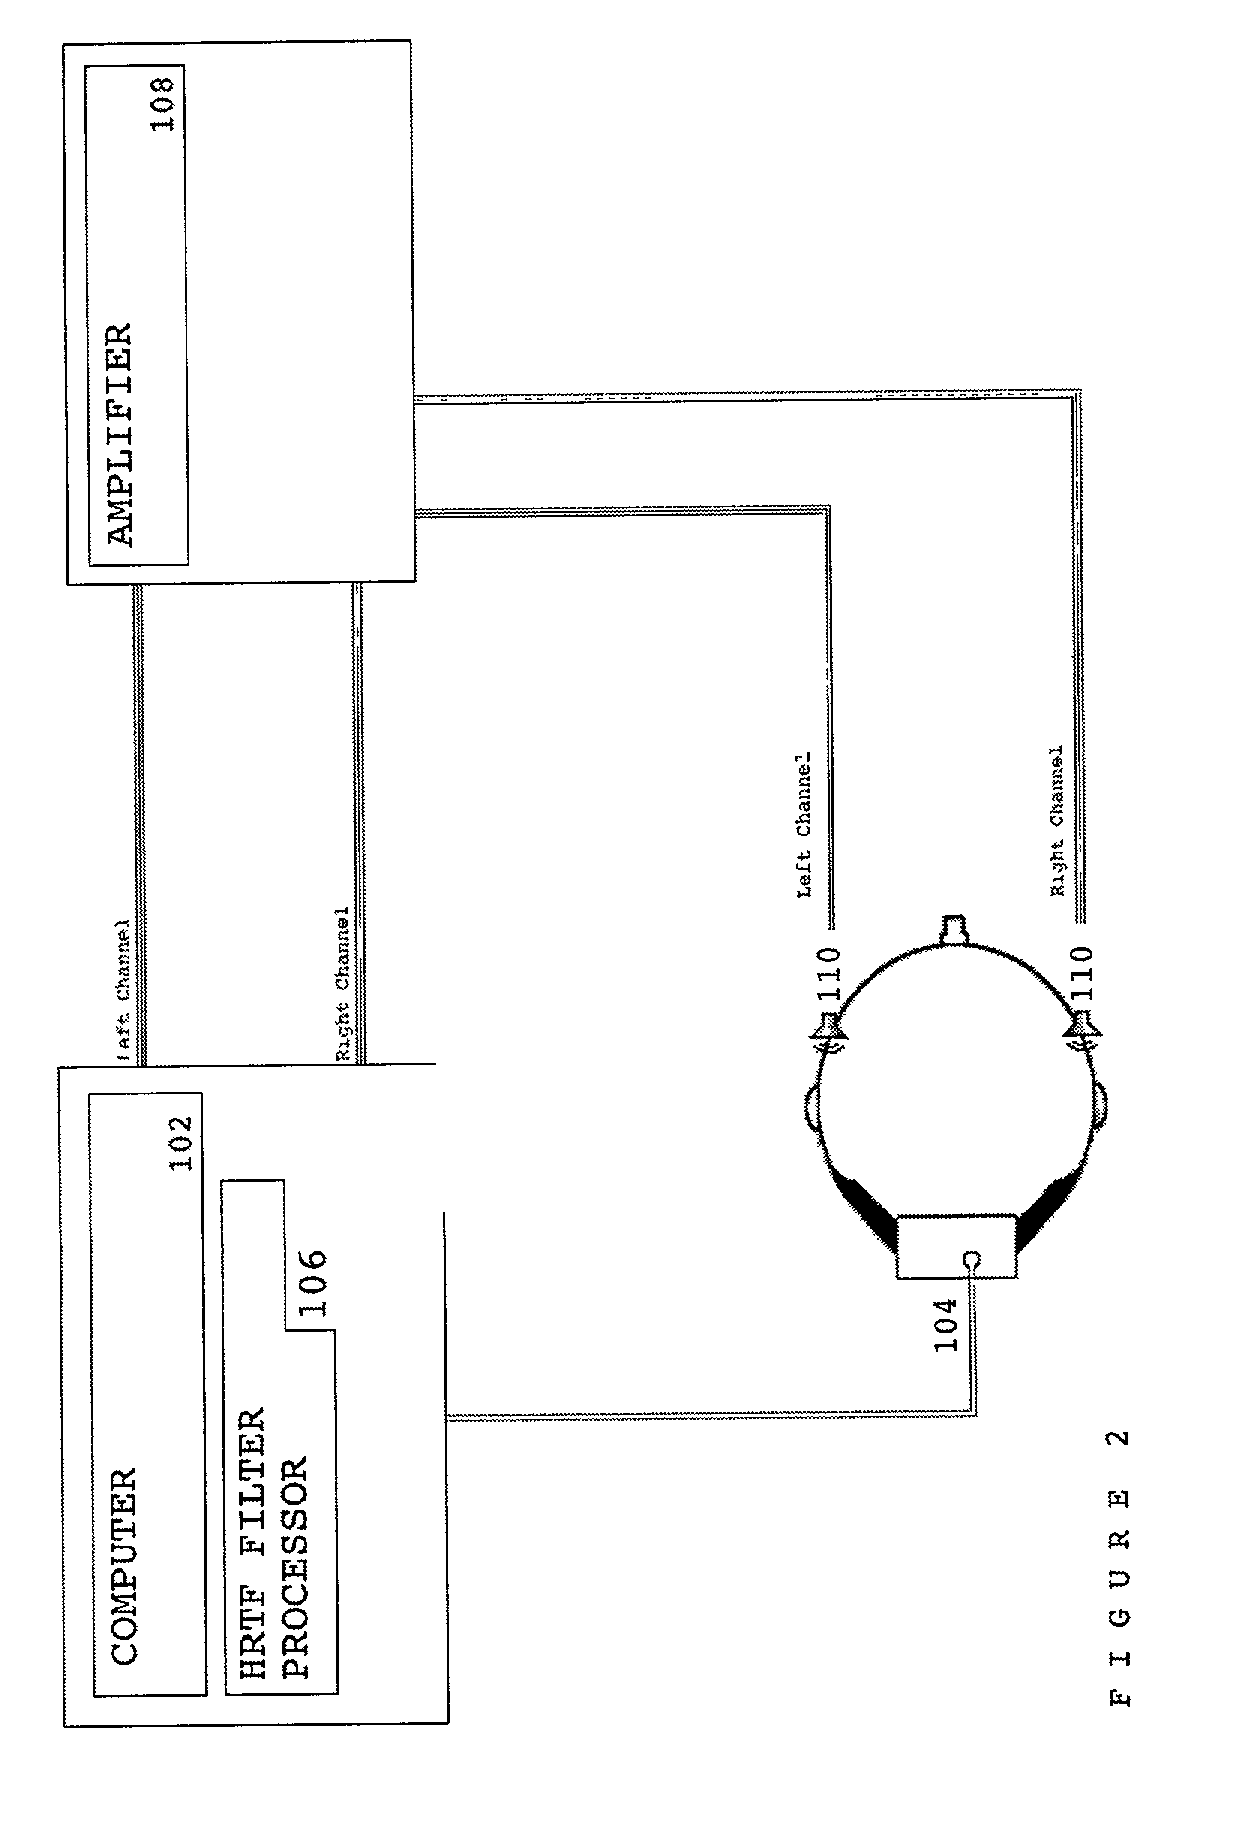 Method and apparatus for producing spatialized audio signals